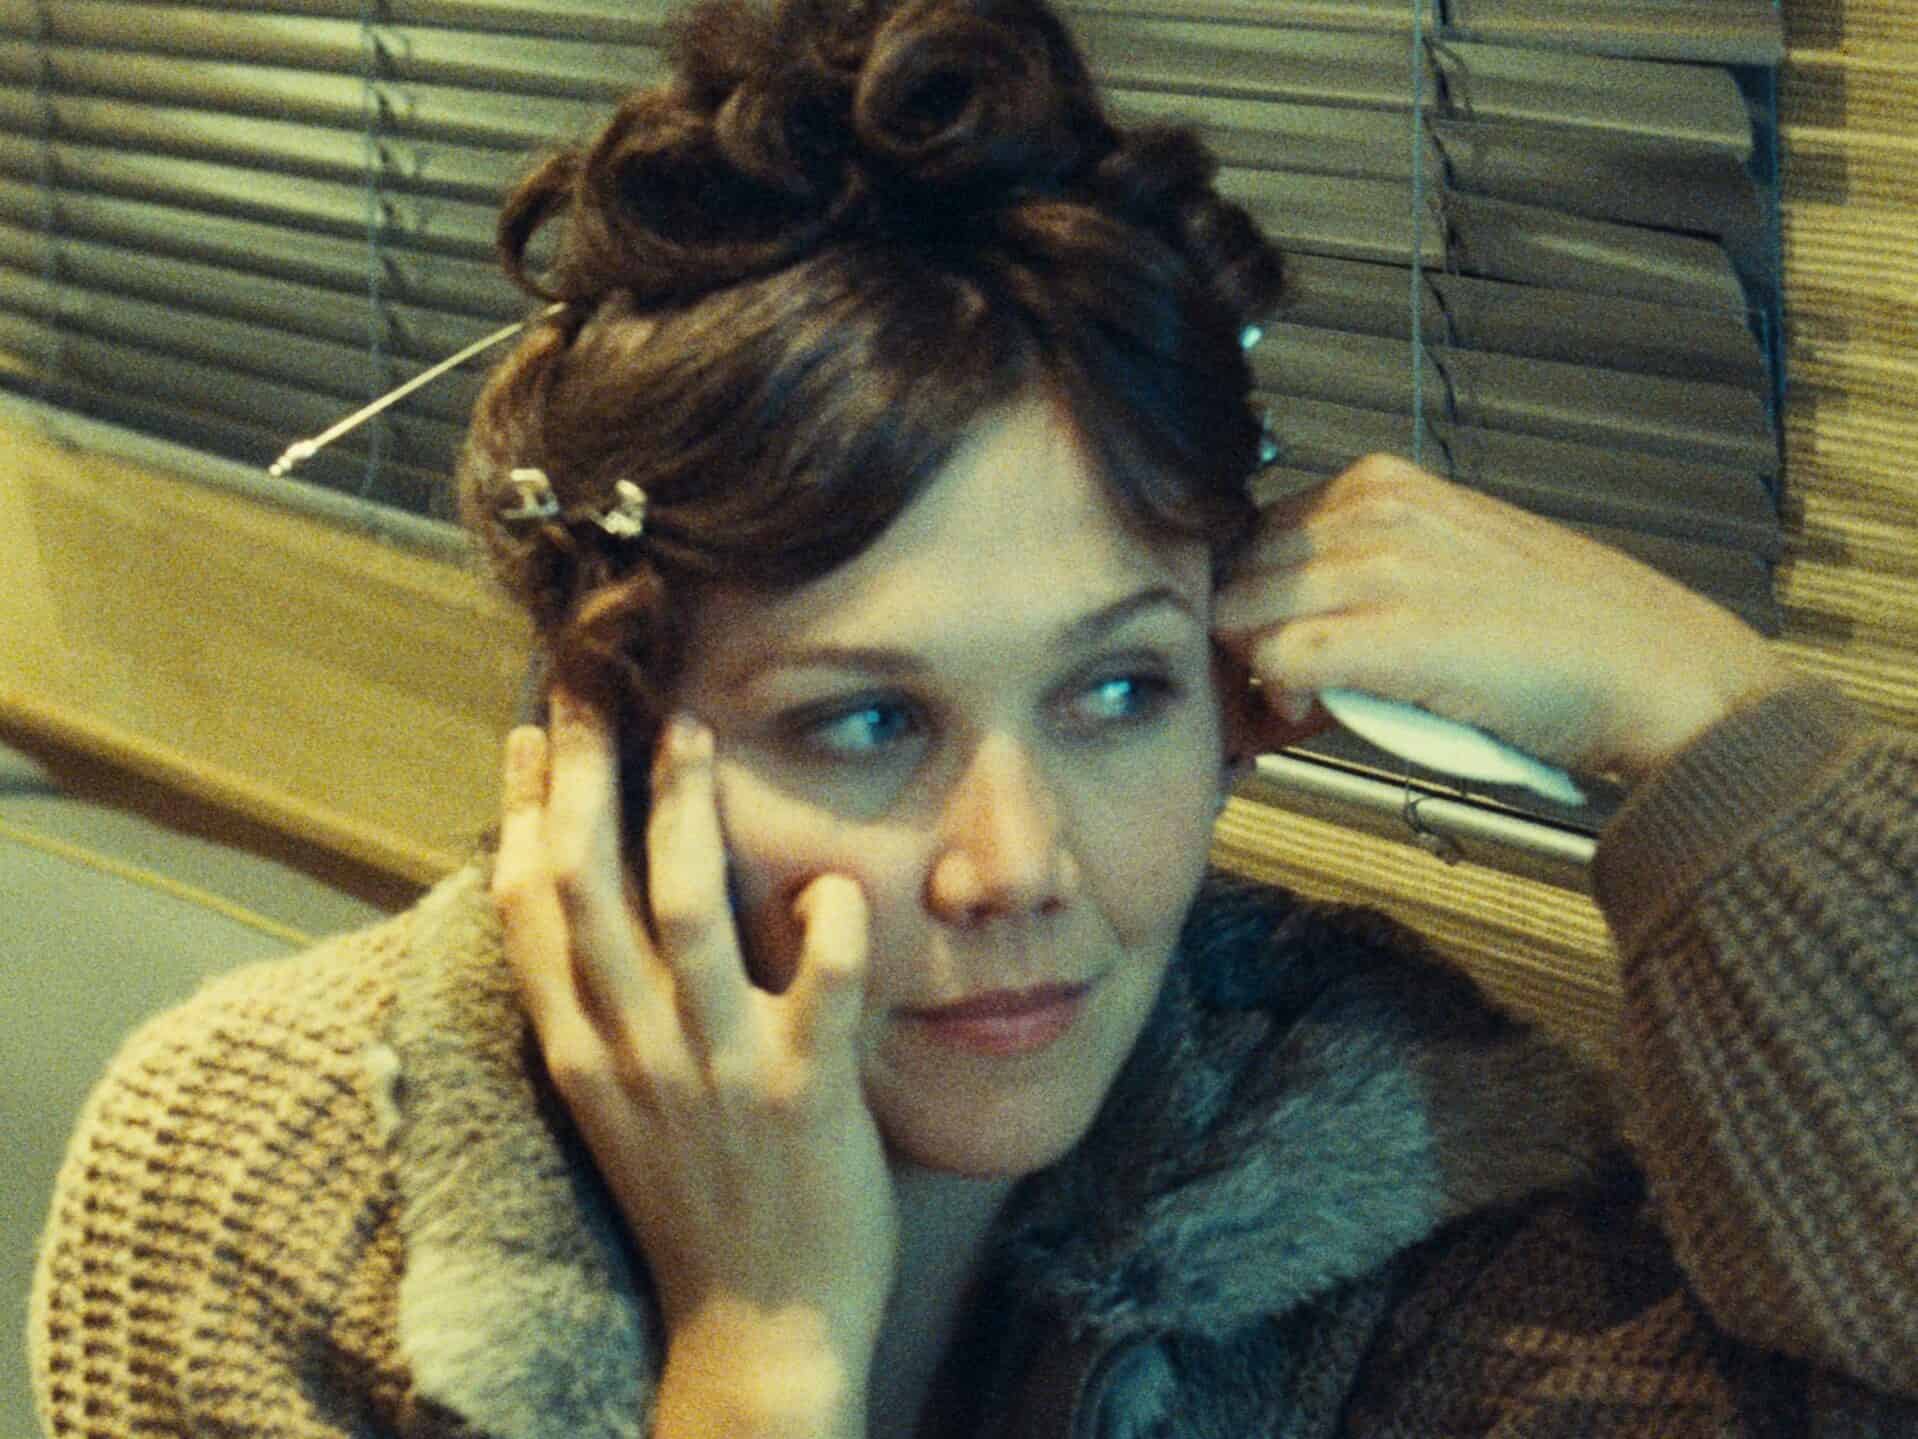 Maggie Gyllenhaal began her career as a teenager with minor roles in several film